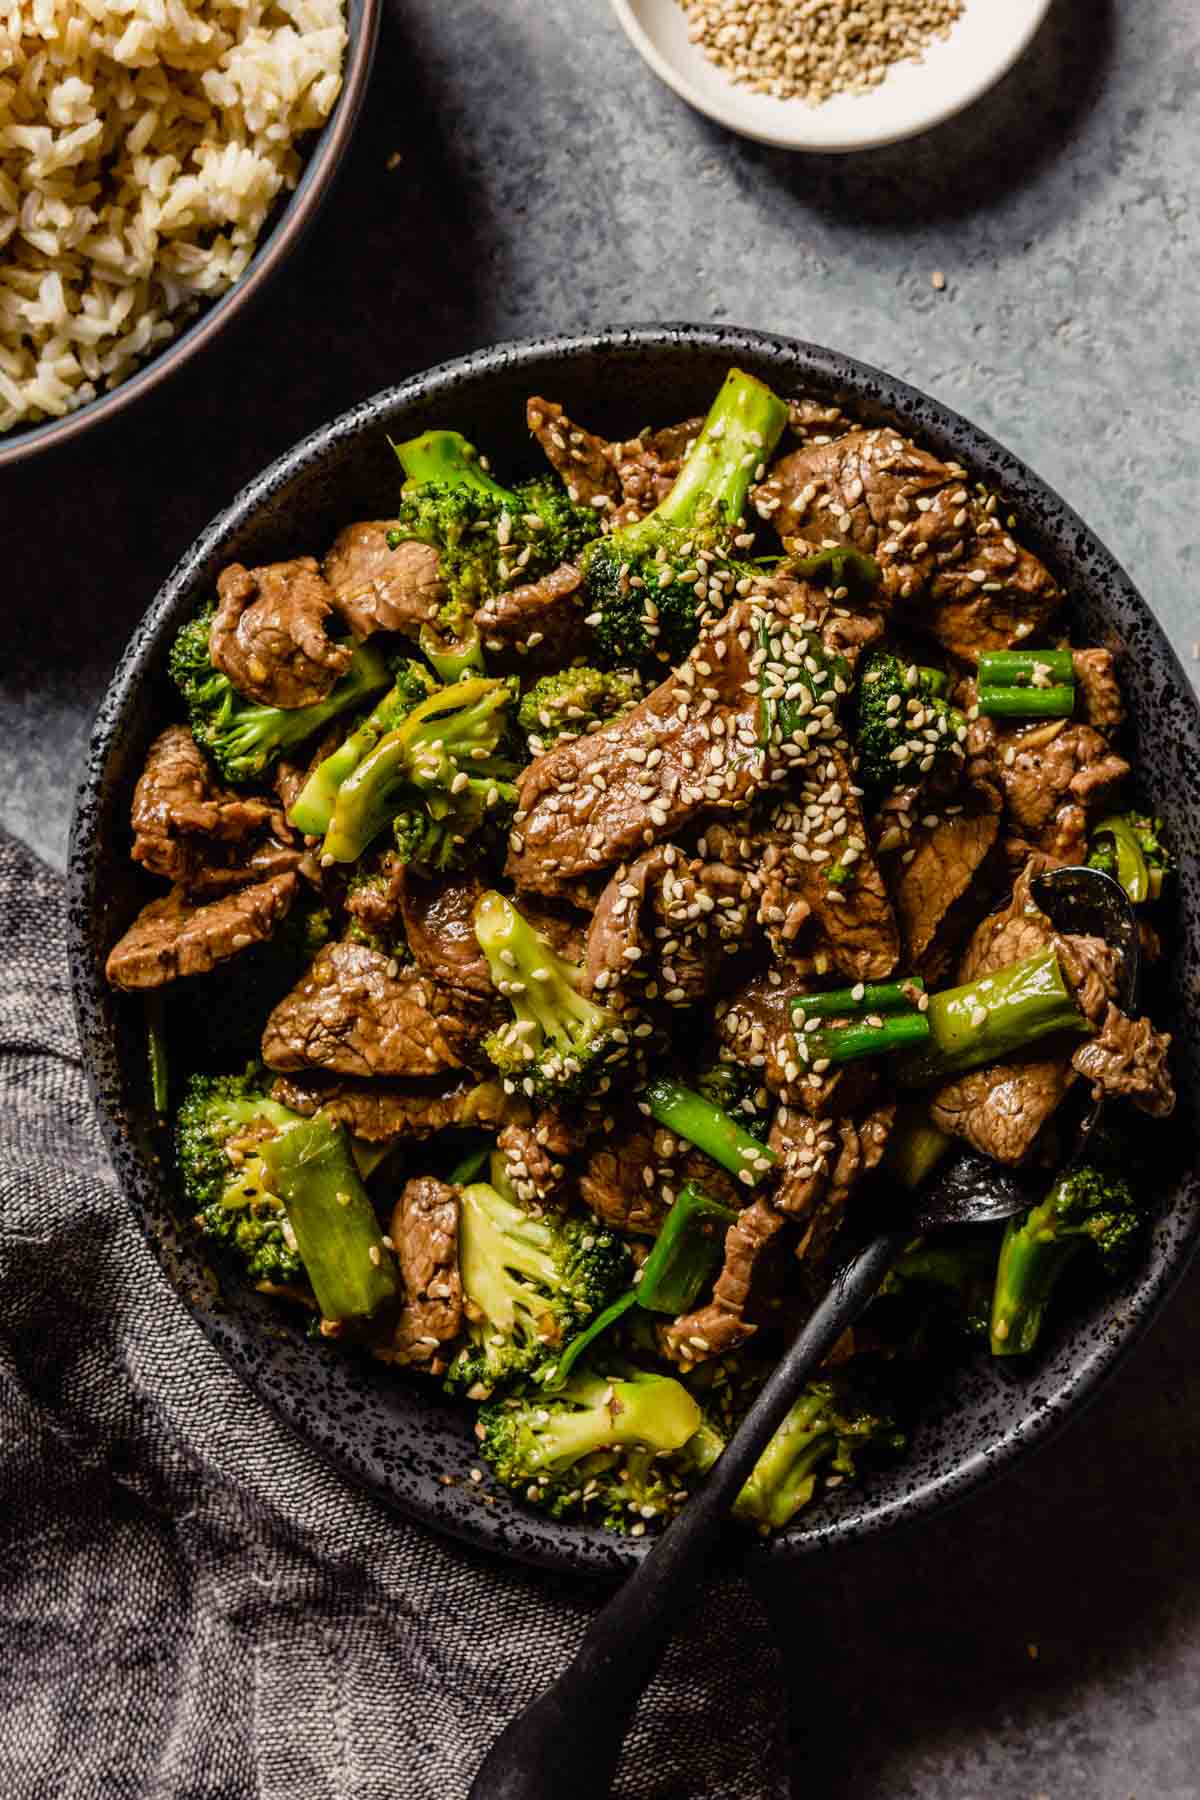 thinly sliced cooked steak and broccoli coated in a sauce and piled into a black bowl